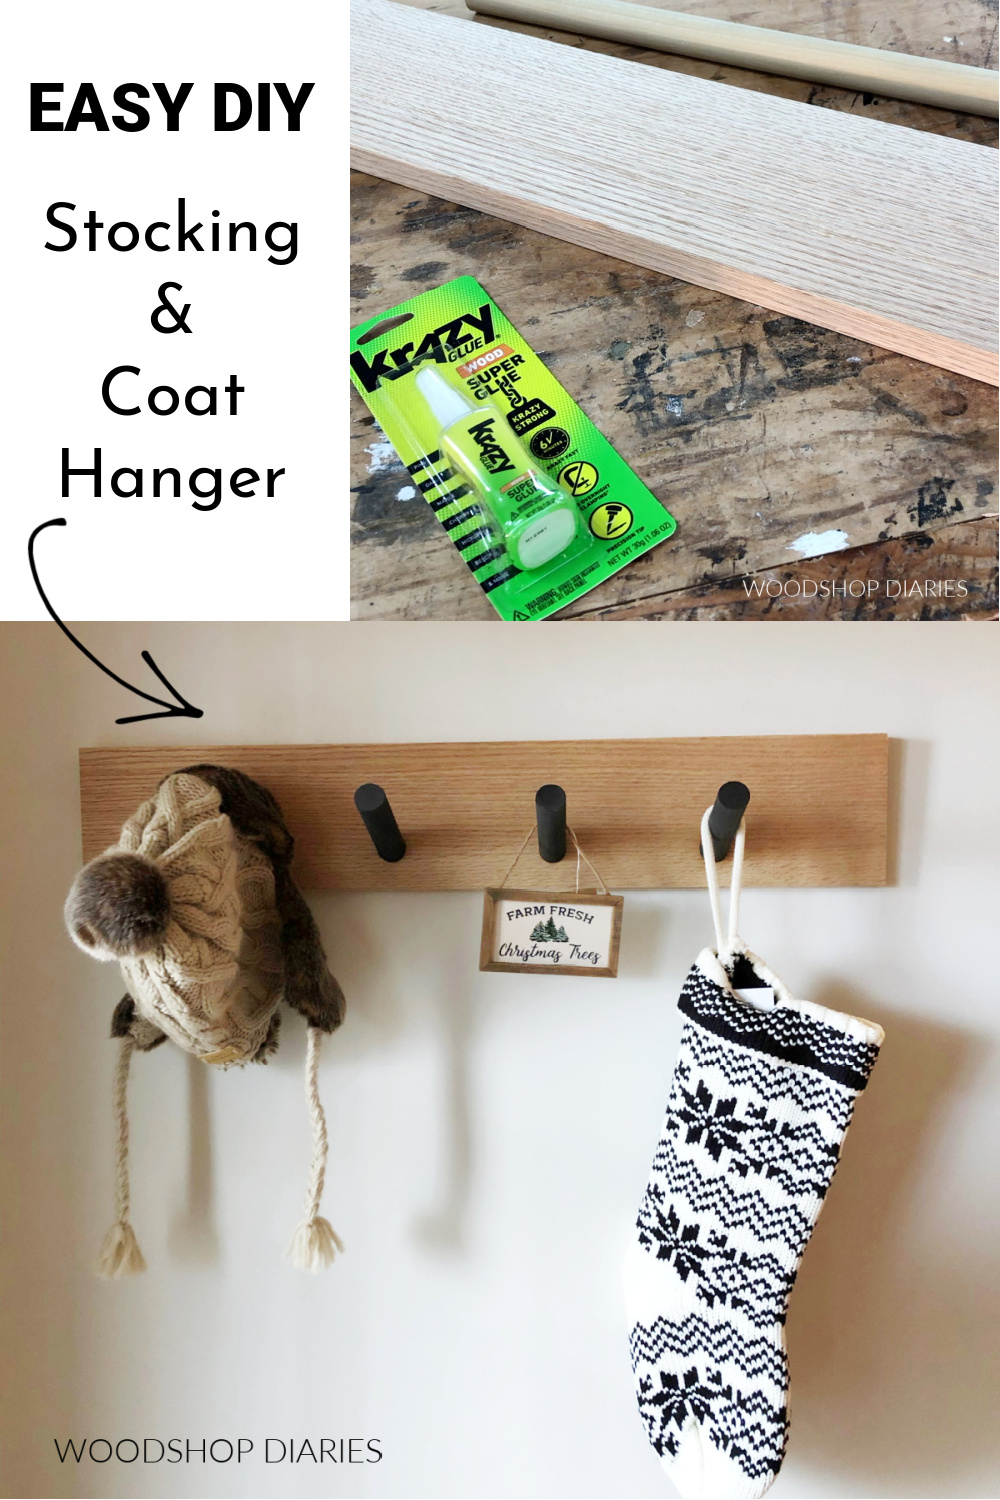 Pinterest collage showing materials on workbench at top and completed stocking, hat, coat rack on bottom